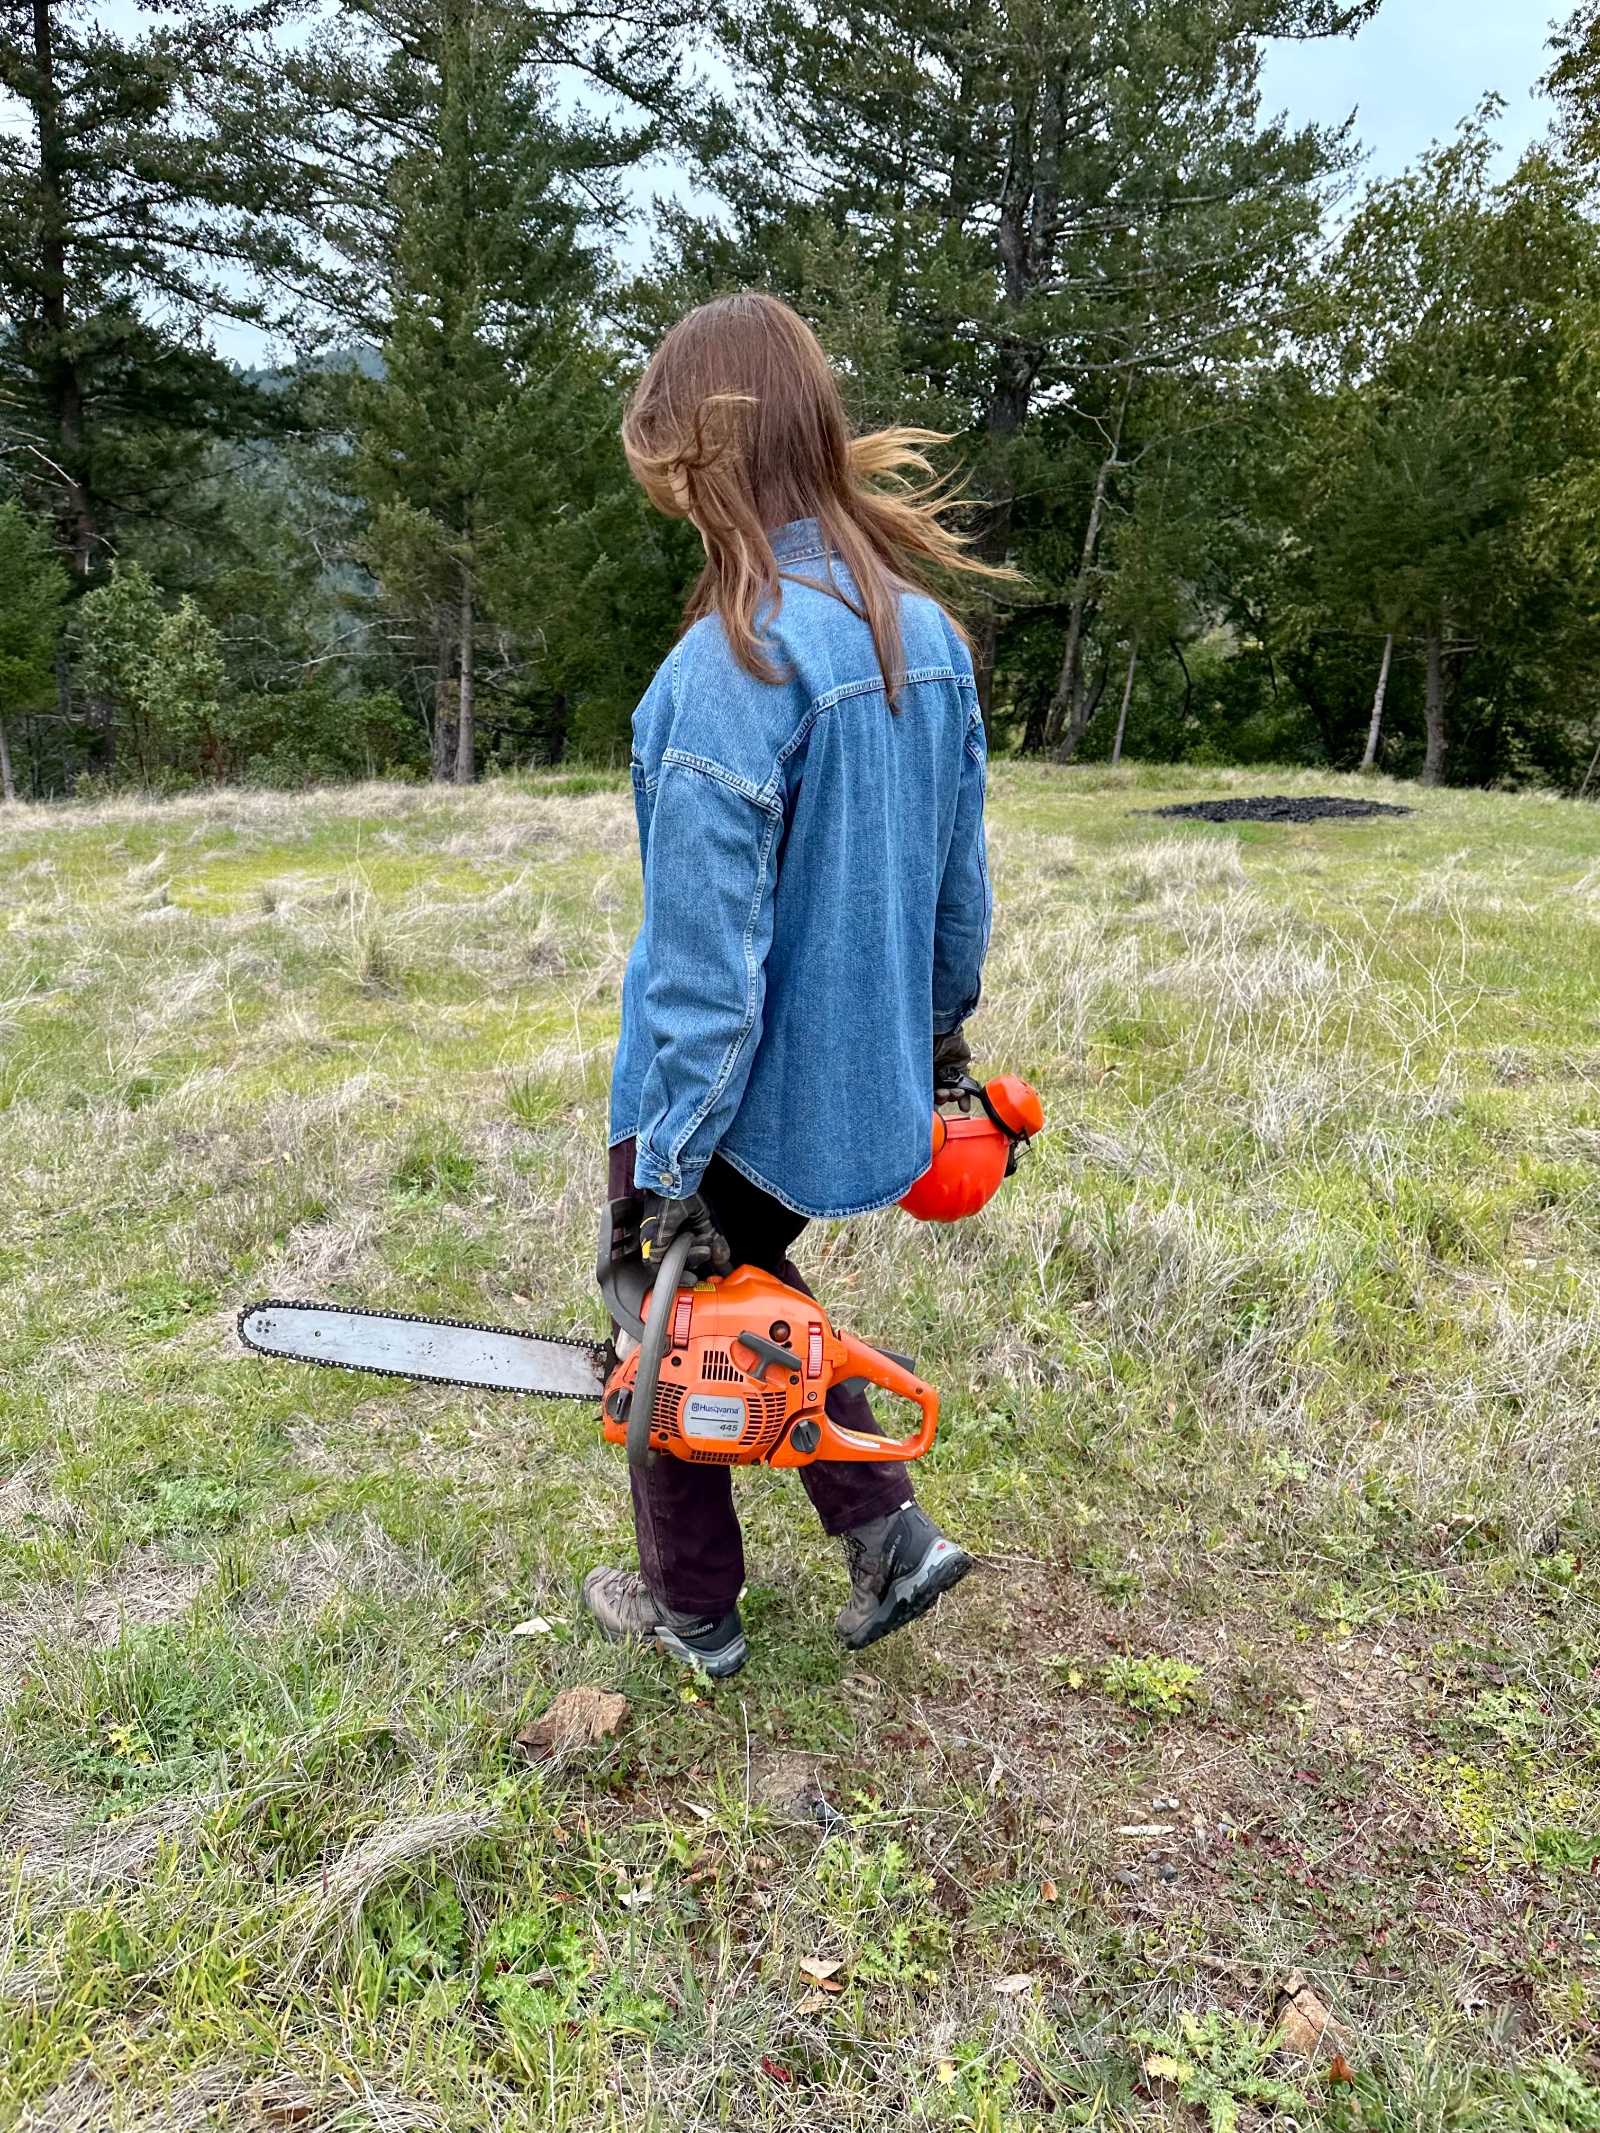 Author walking with a chainsaw